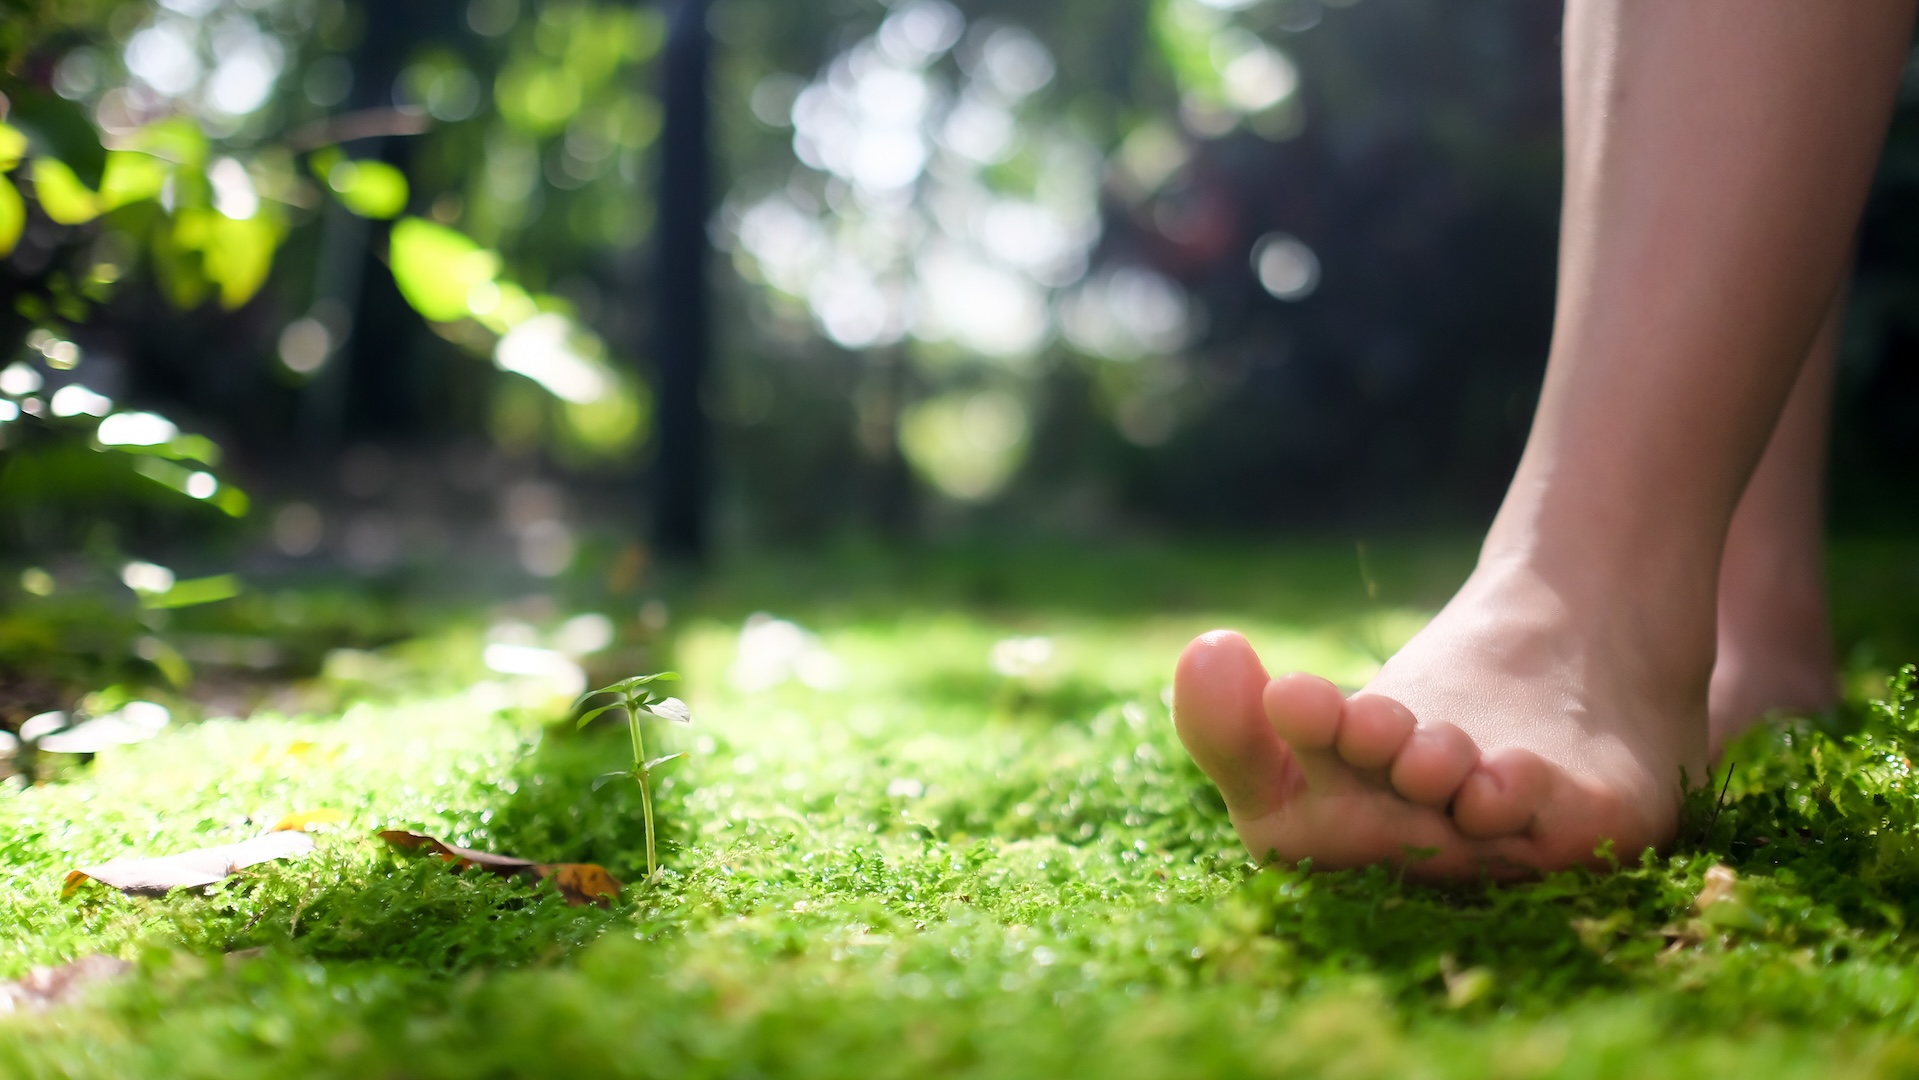 photo shows a close up of a white person's bare foot as they step onto a soft bed of grass